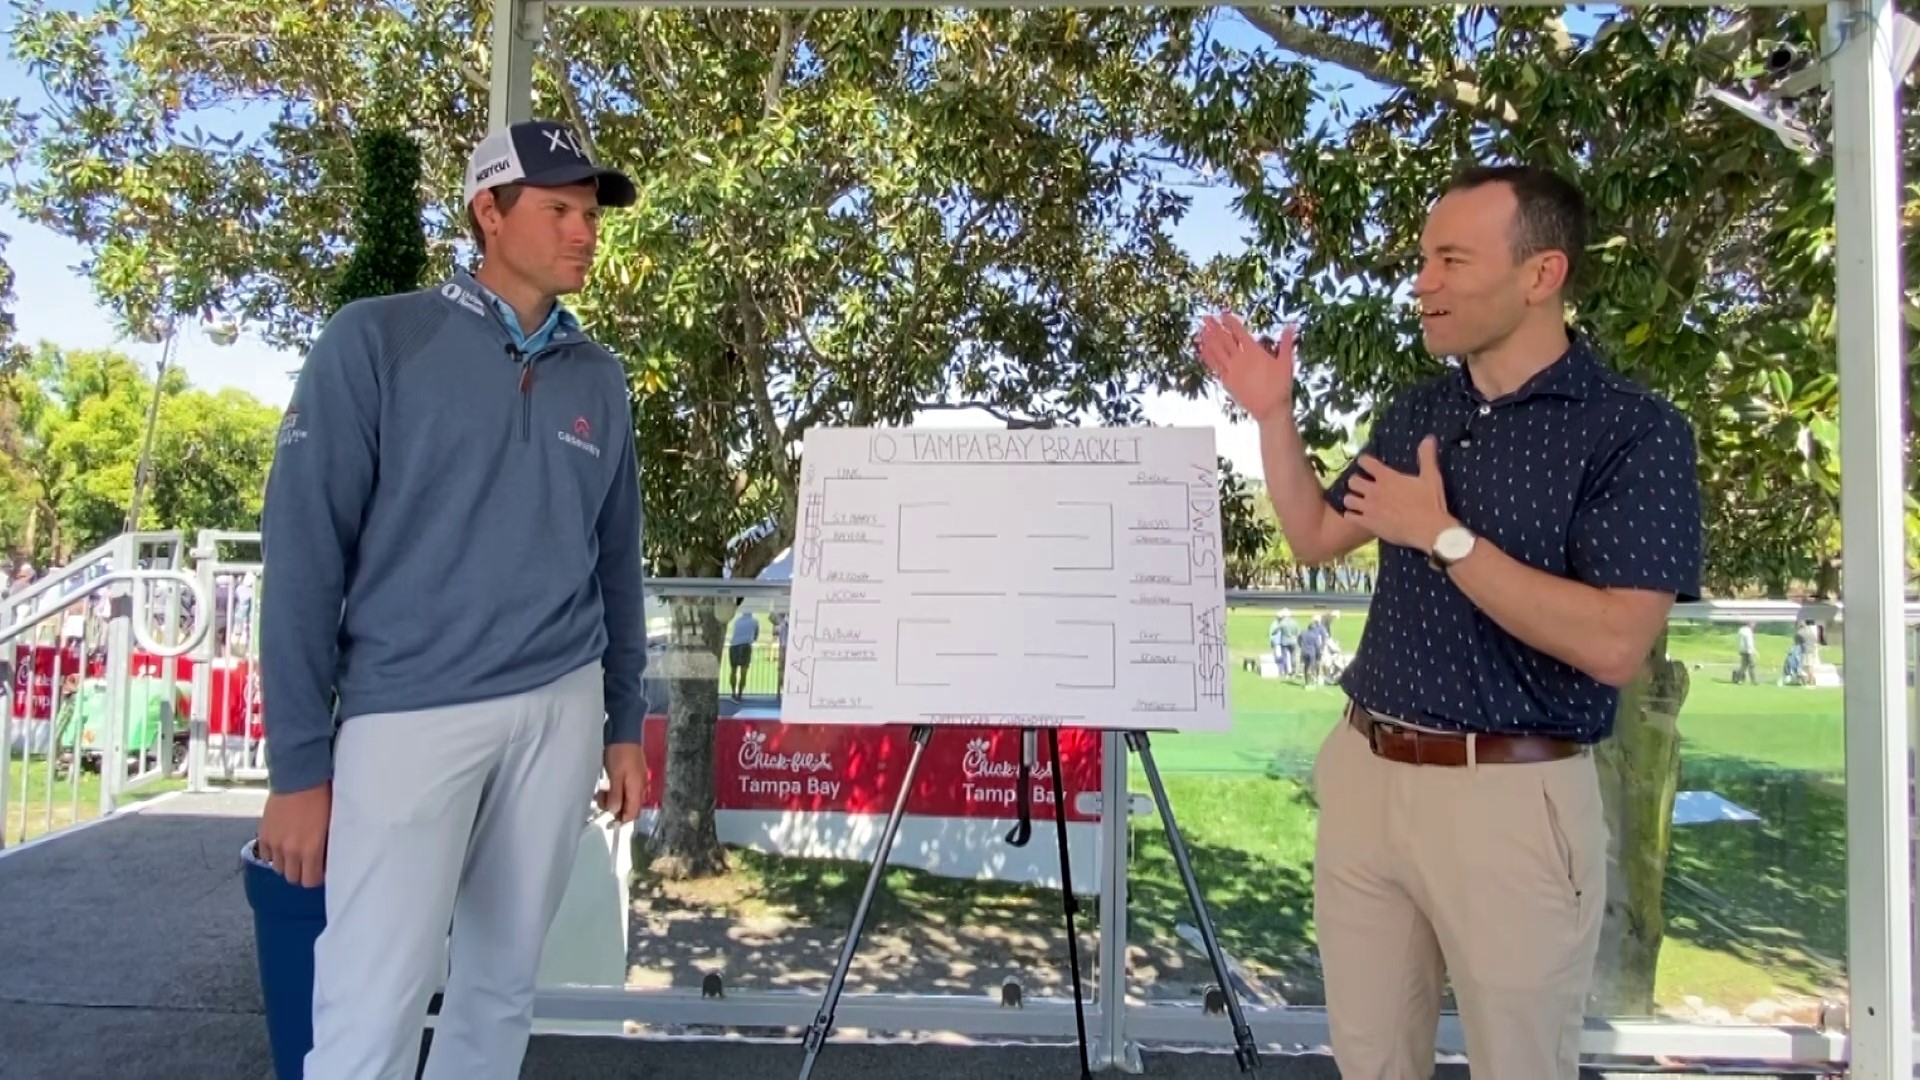 10 Tampa Bay sports director Evan Closky catches up with Purdue product Adam Schenk on which team he thinks will come out on top in the NCAA tournament.